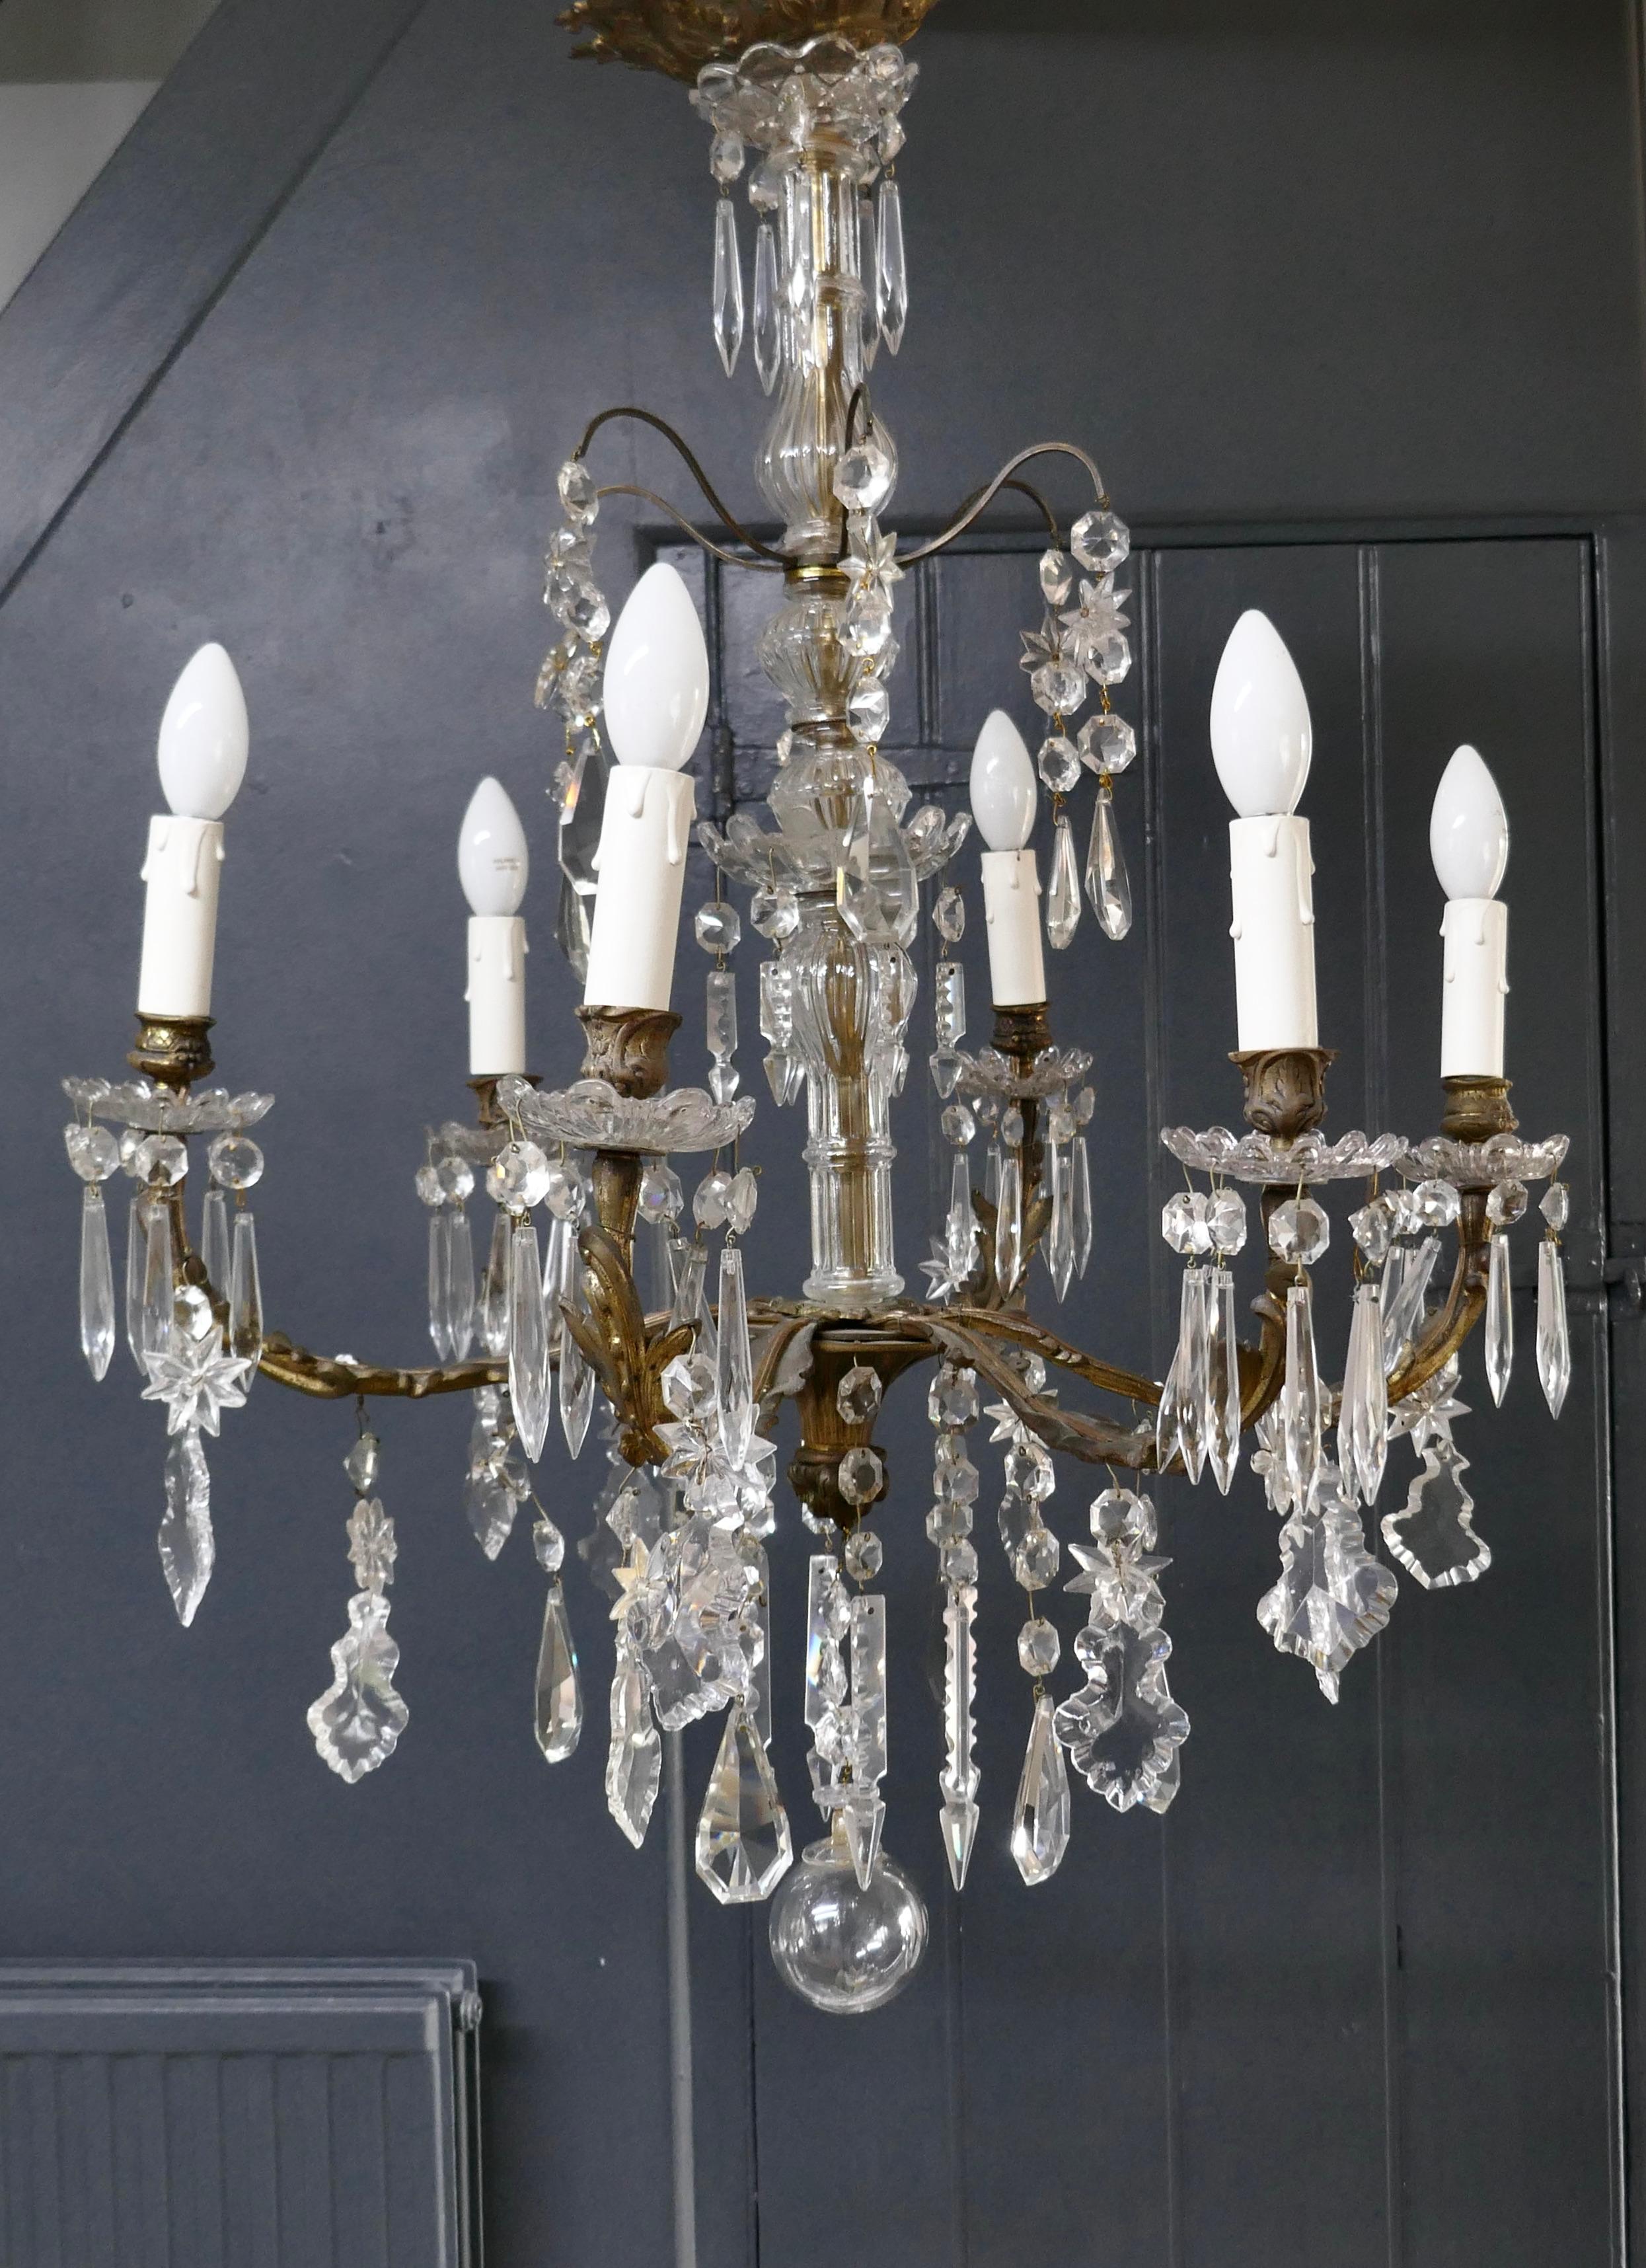 French Provincial Stunning French Cristal 6 Branch Brass Chandelier For Sale